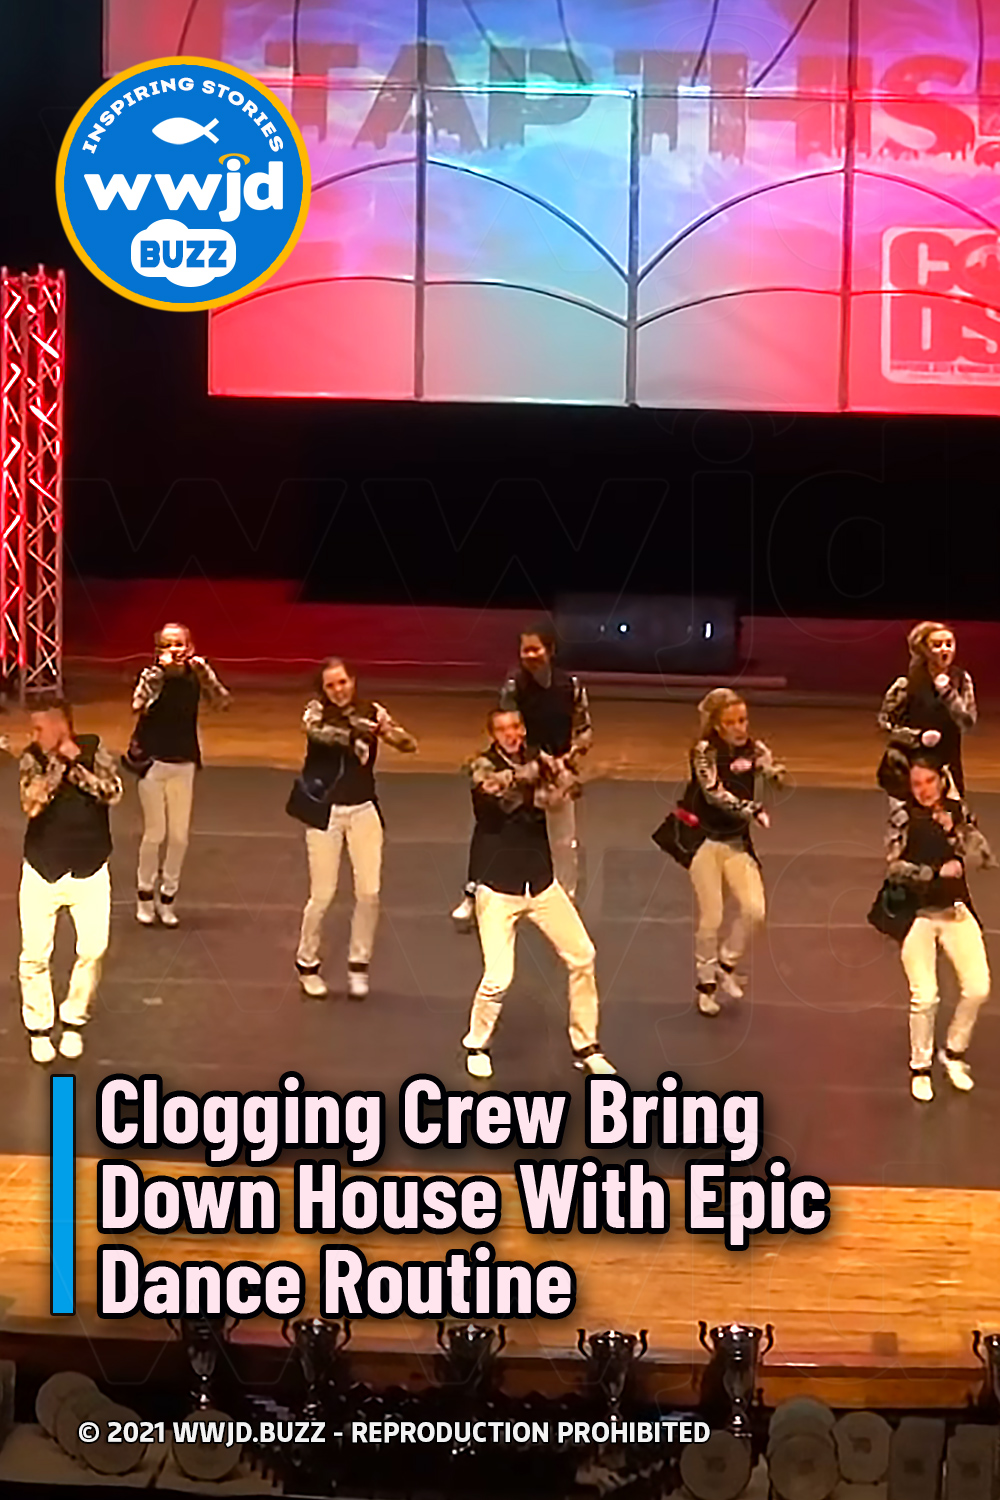 Clogging Crew Bring Down House With Epic Dance Routine